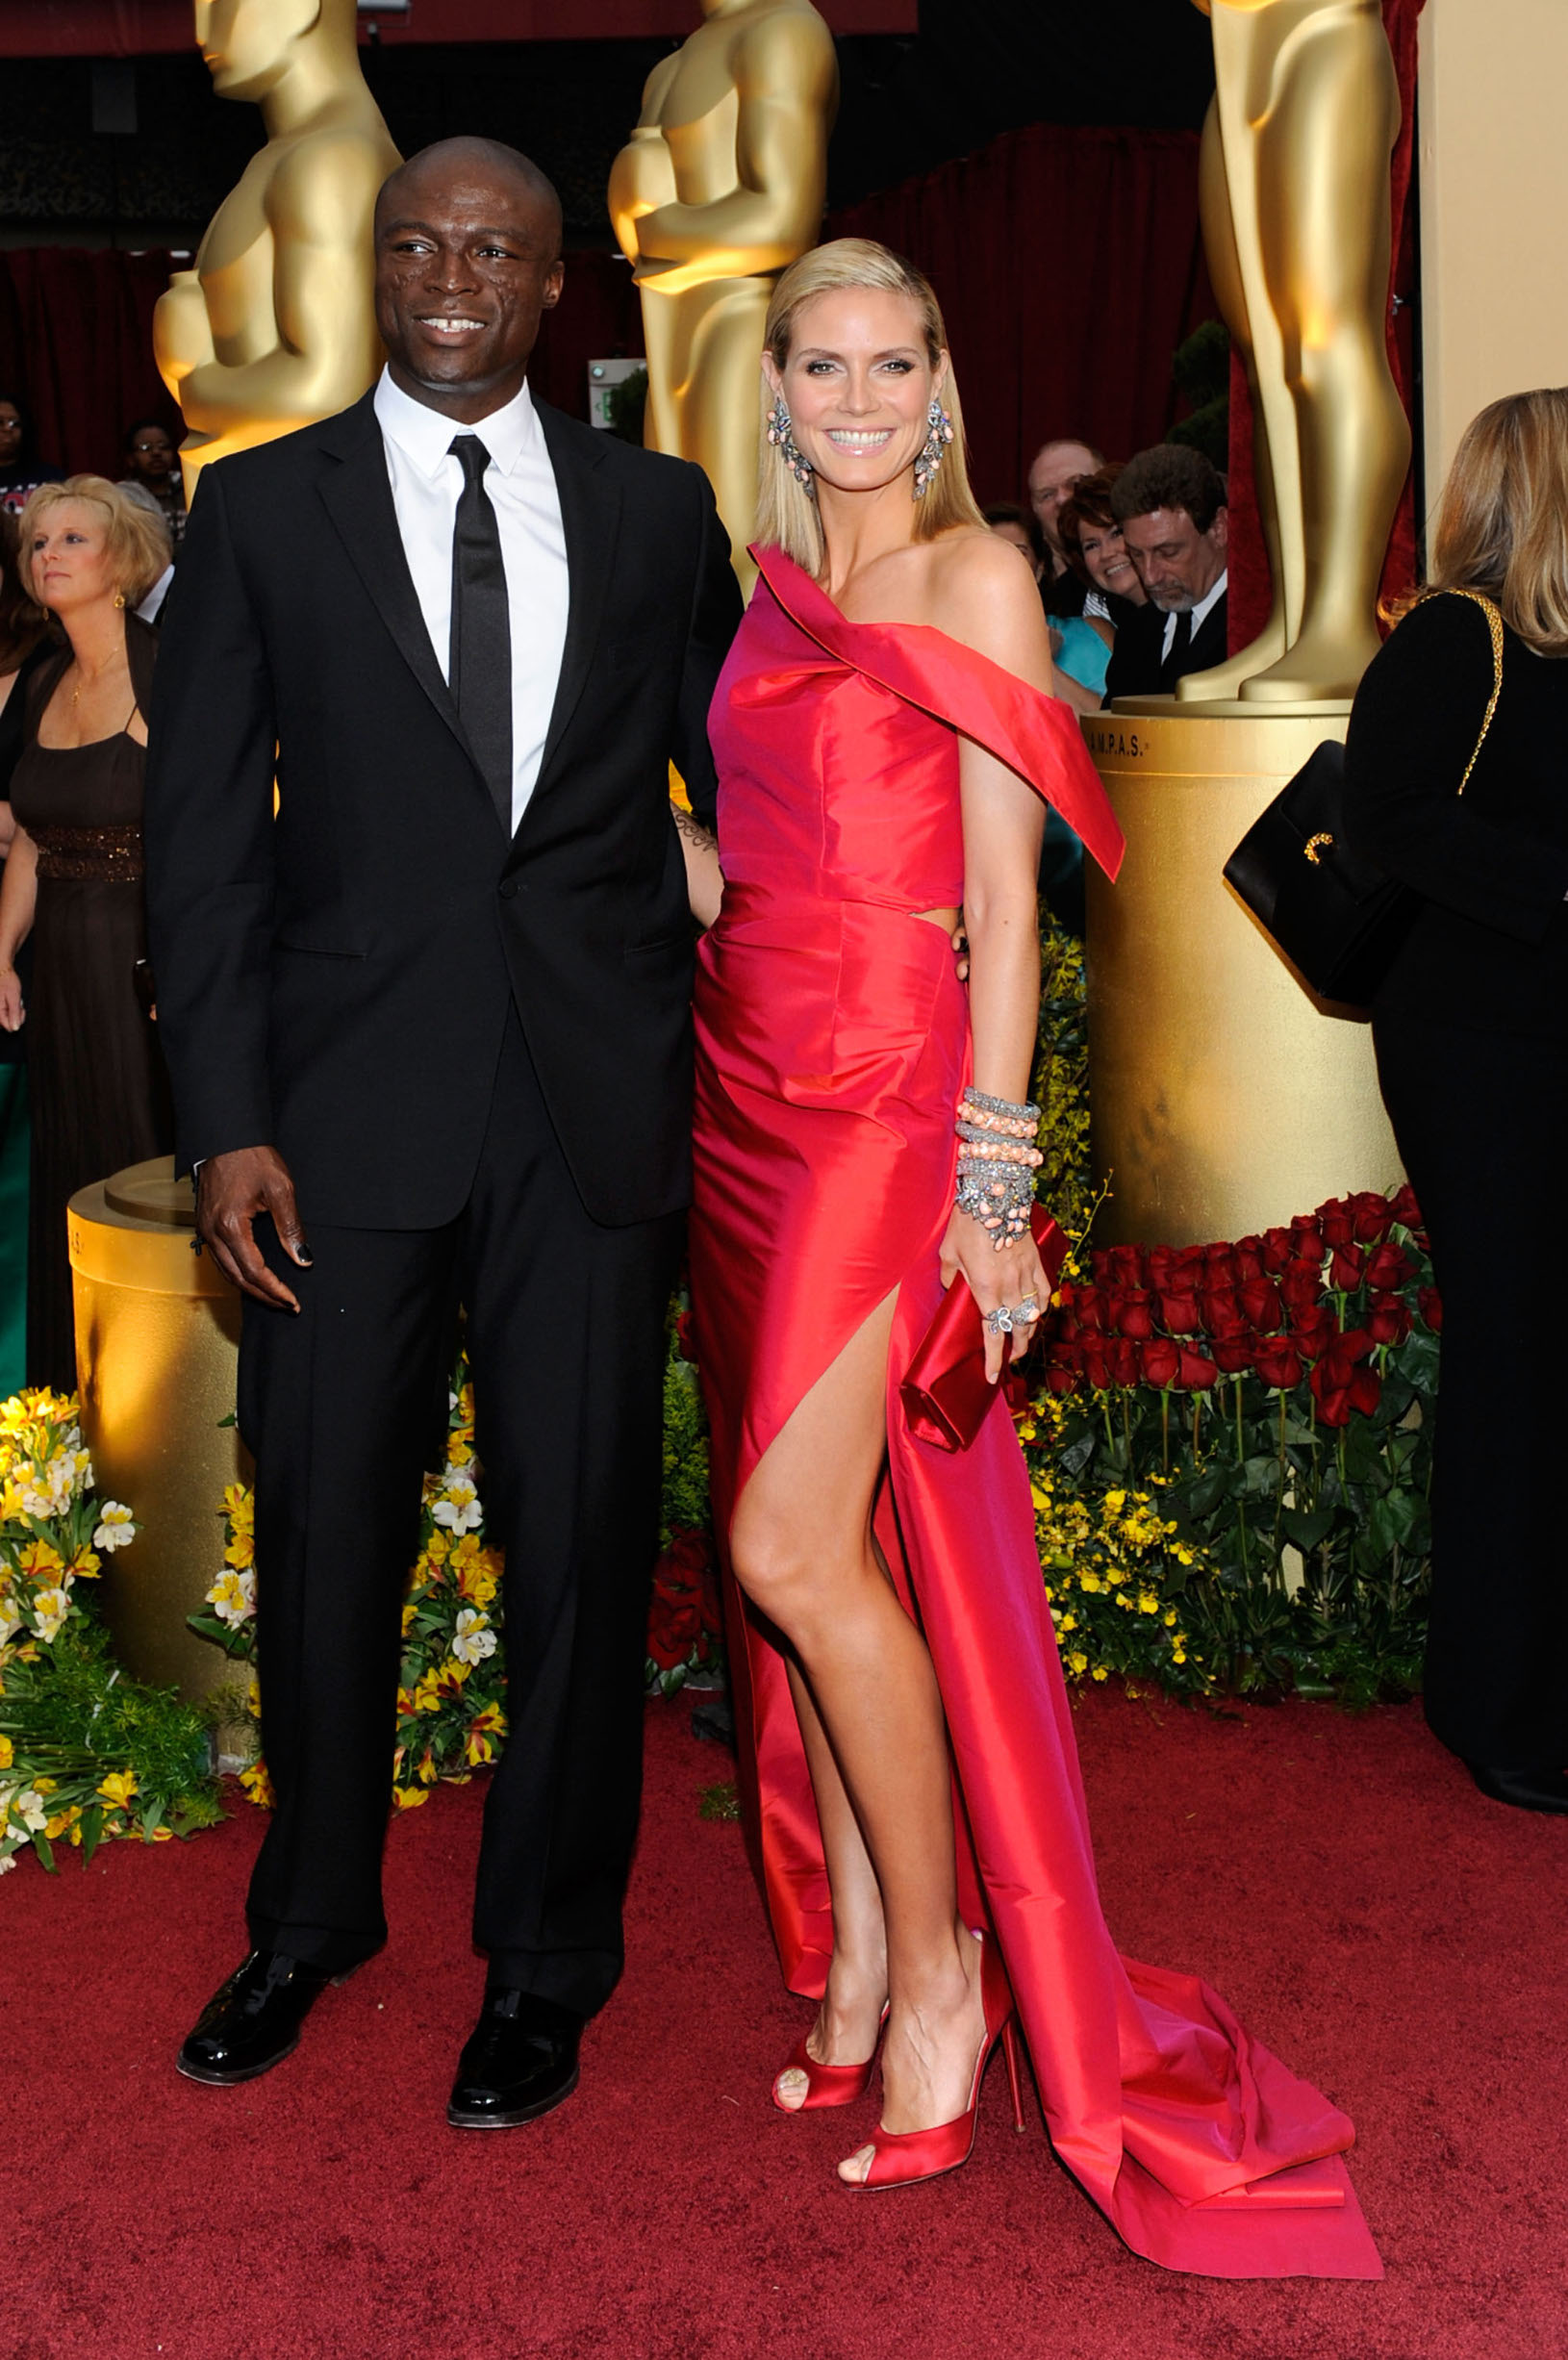 LOS ANGELES, CA - FEBRUARY 22:  Music artist Seal (L) and his wife, model Heidi Klum, arrives at the 81st Annual Academy Awards held at Kodak Theatre on February 22, 2009 in Los Angeles, California.  (Photo by Kevork Djansezian/Getty Images)